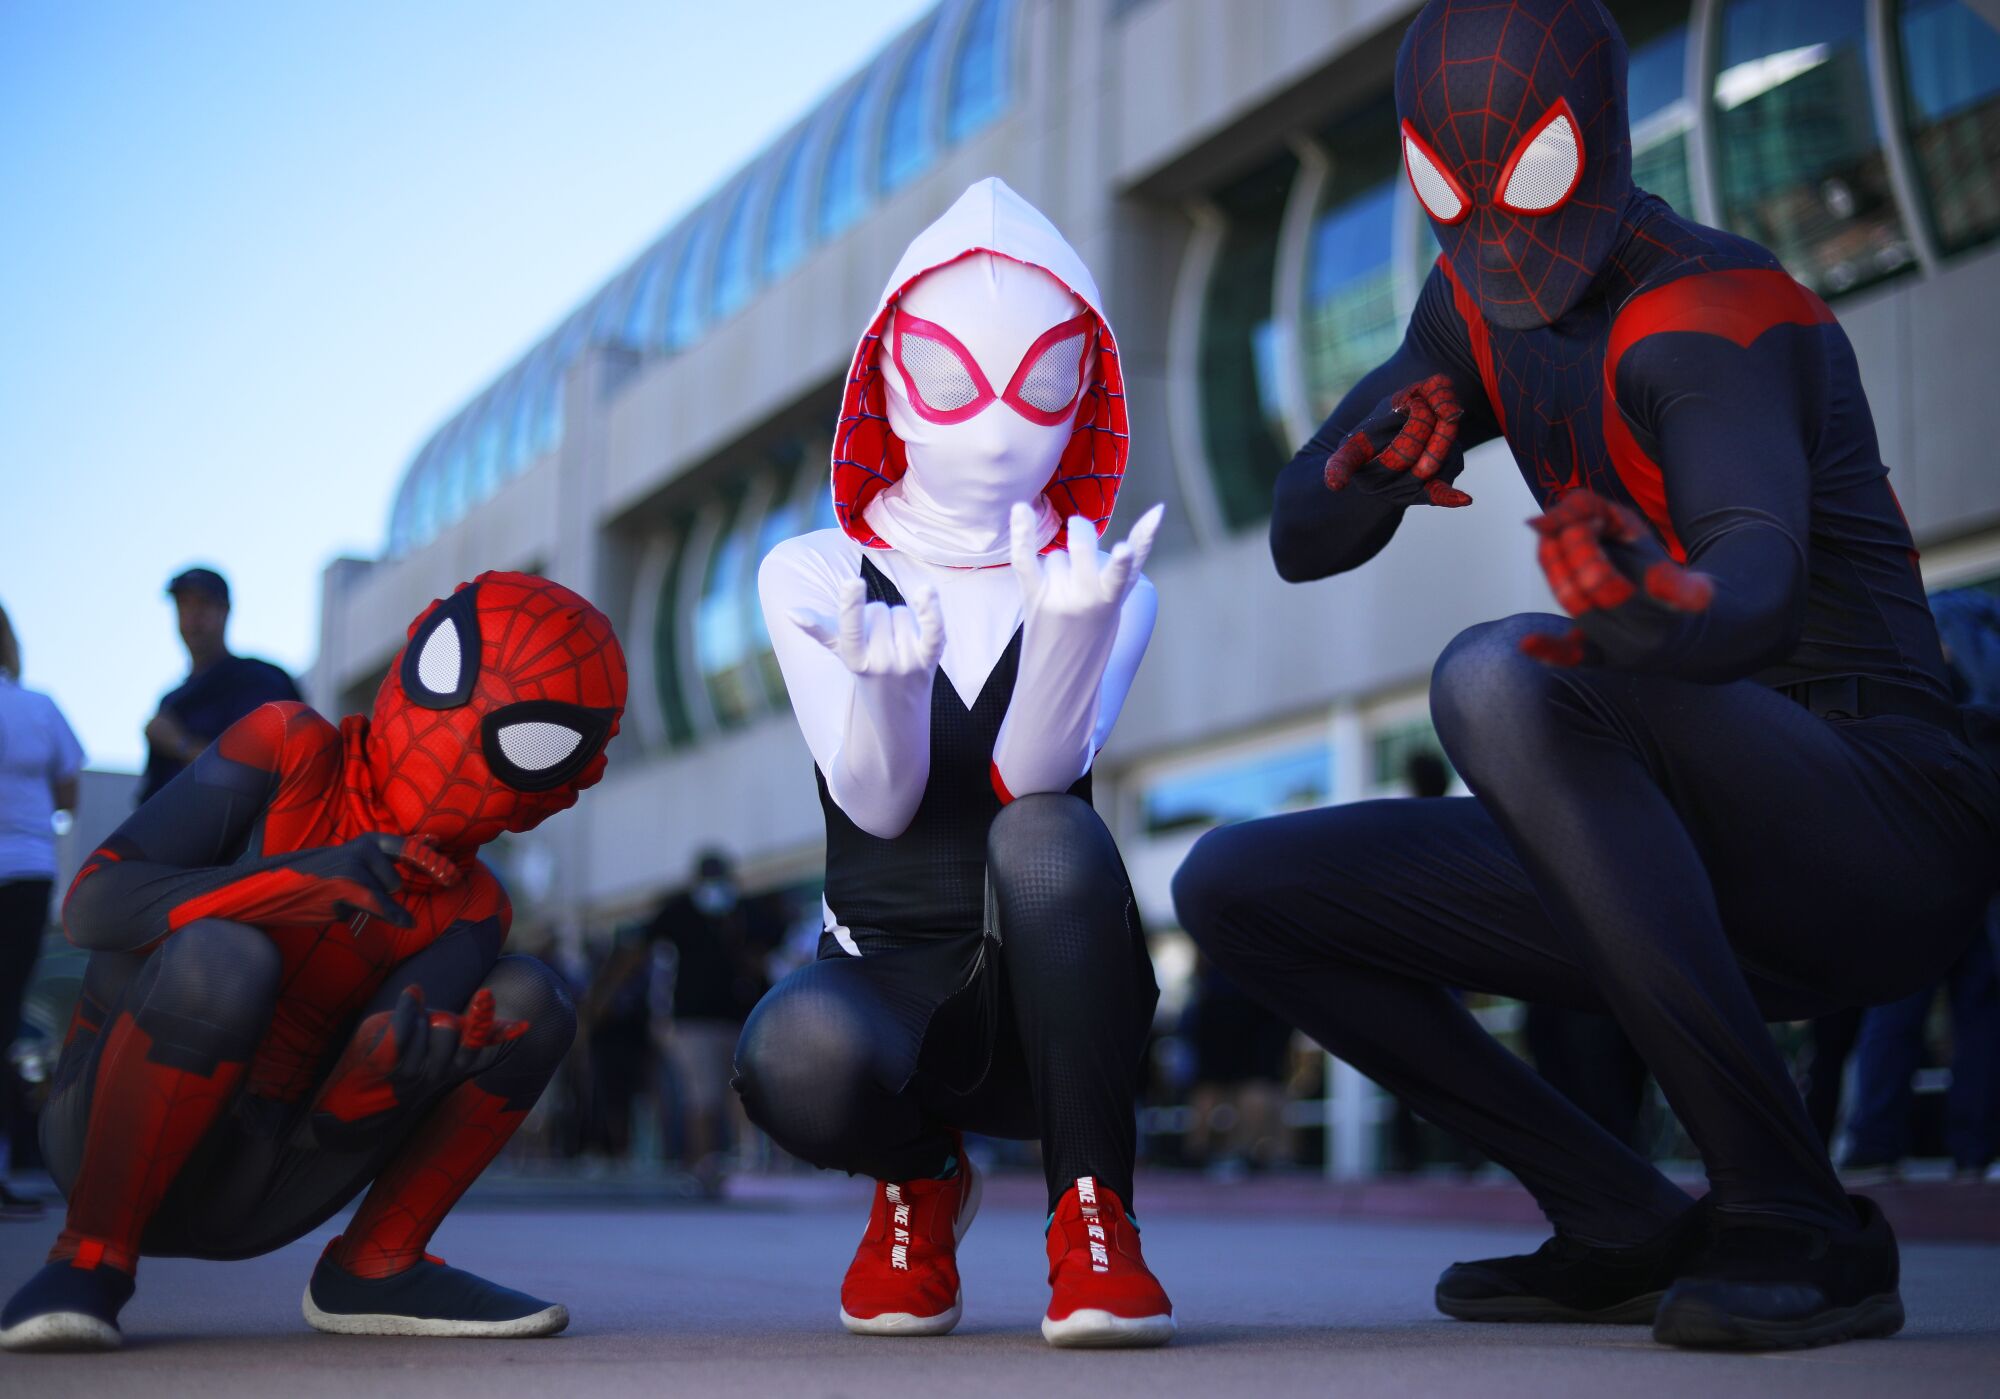 essed as Spider-man, Serenity Morales, Spider-Gwen and Ben Morris dressed as Spider-Man at Comic-Con Special Edition.